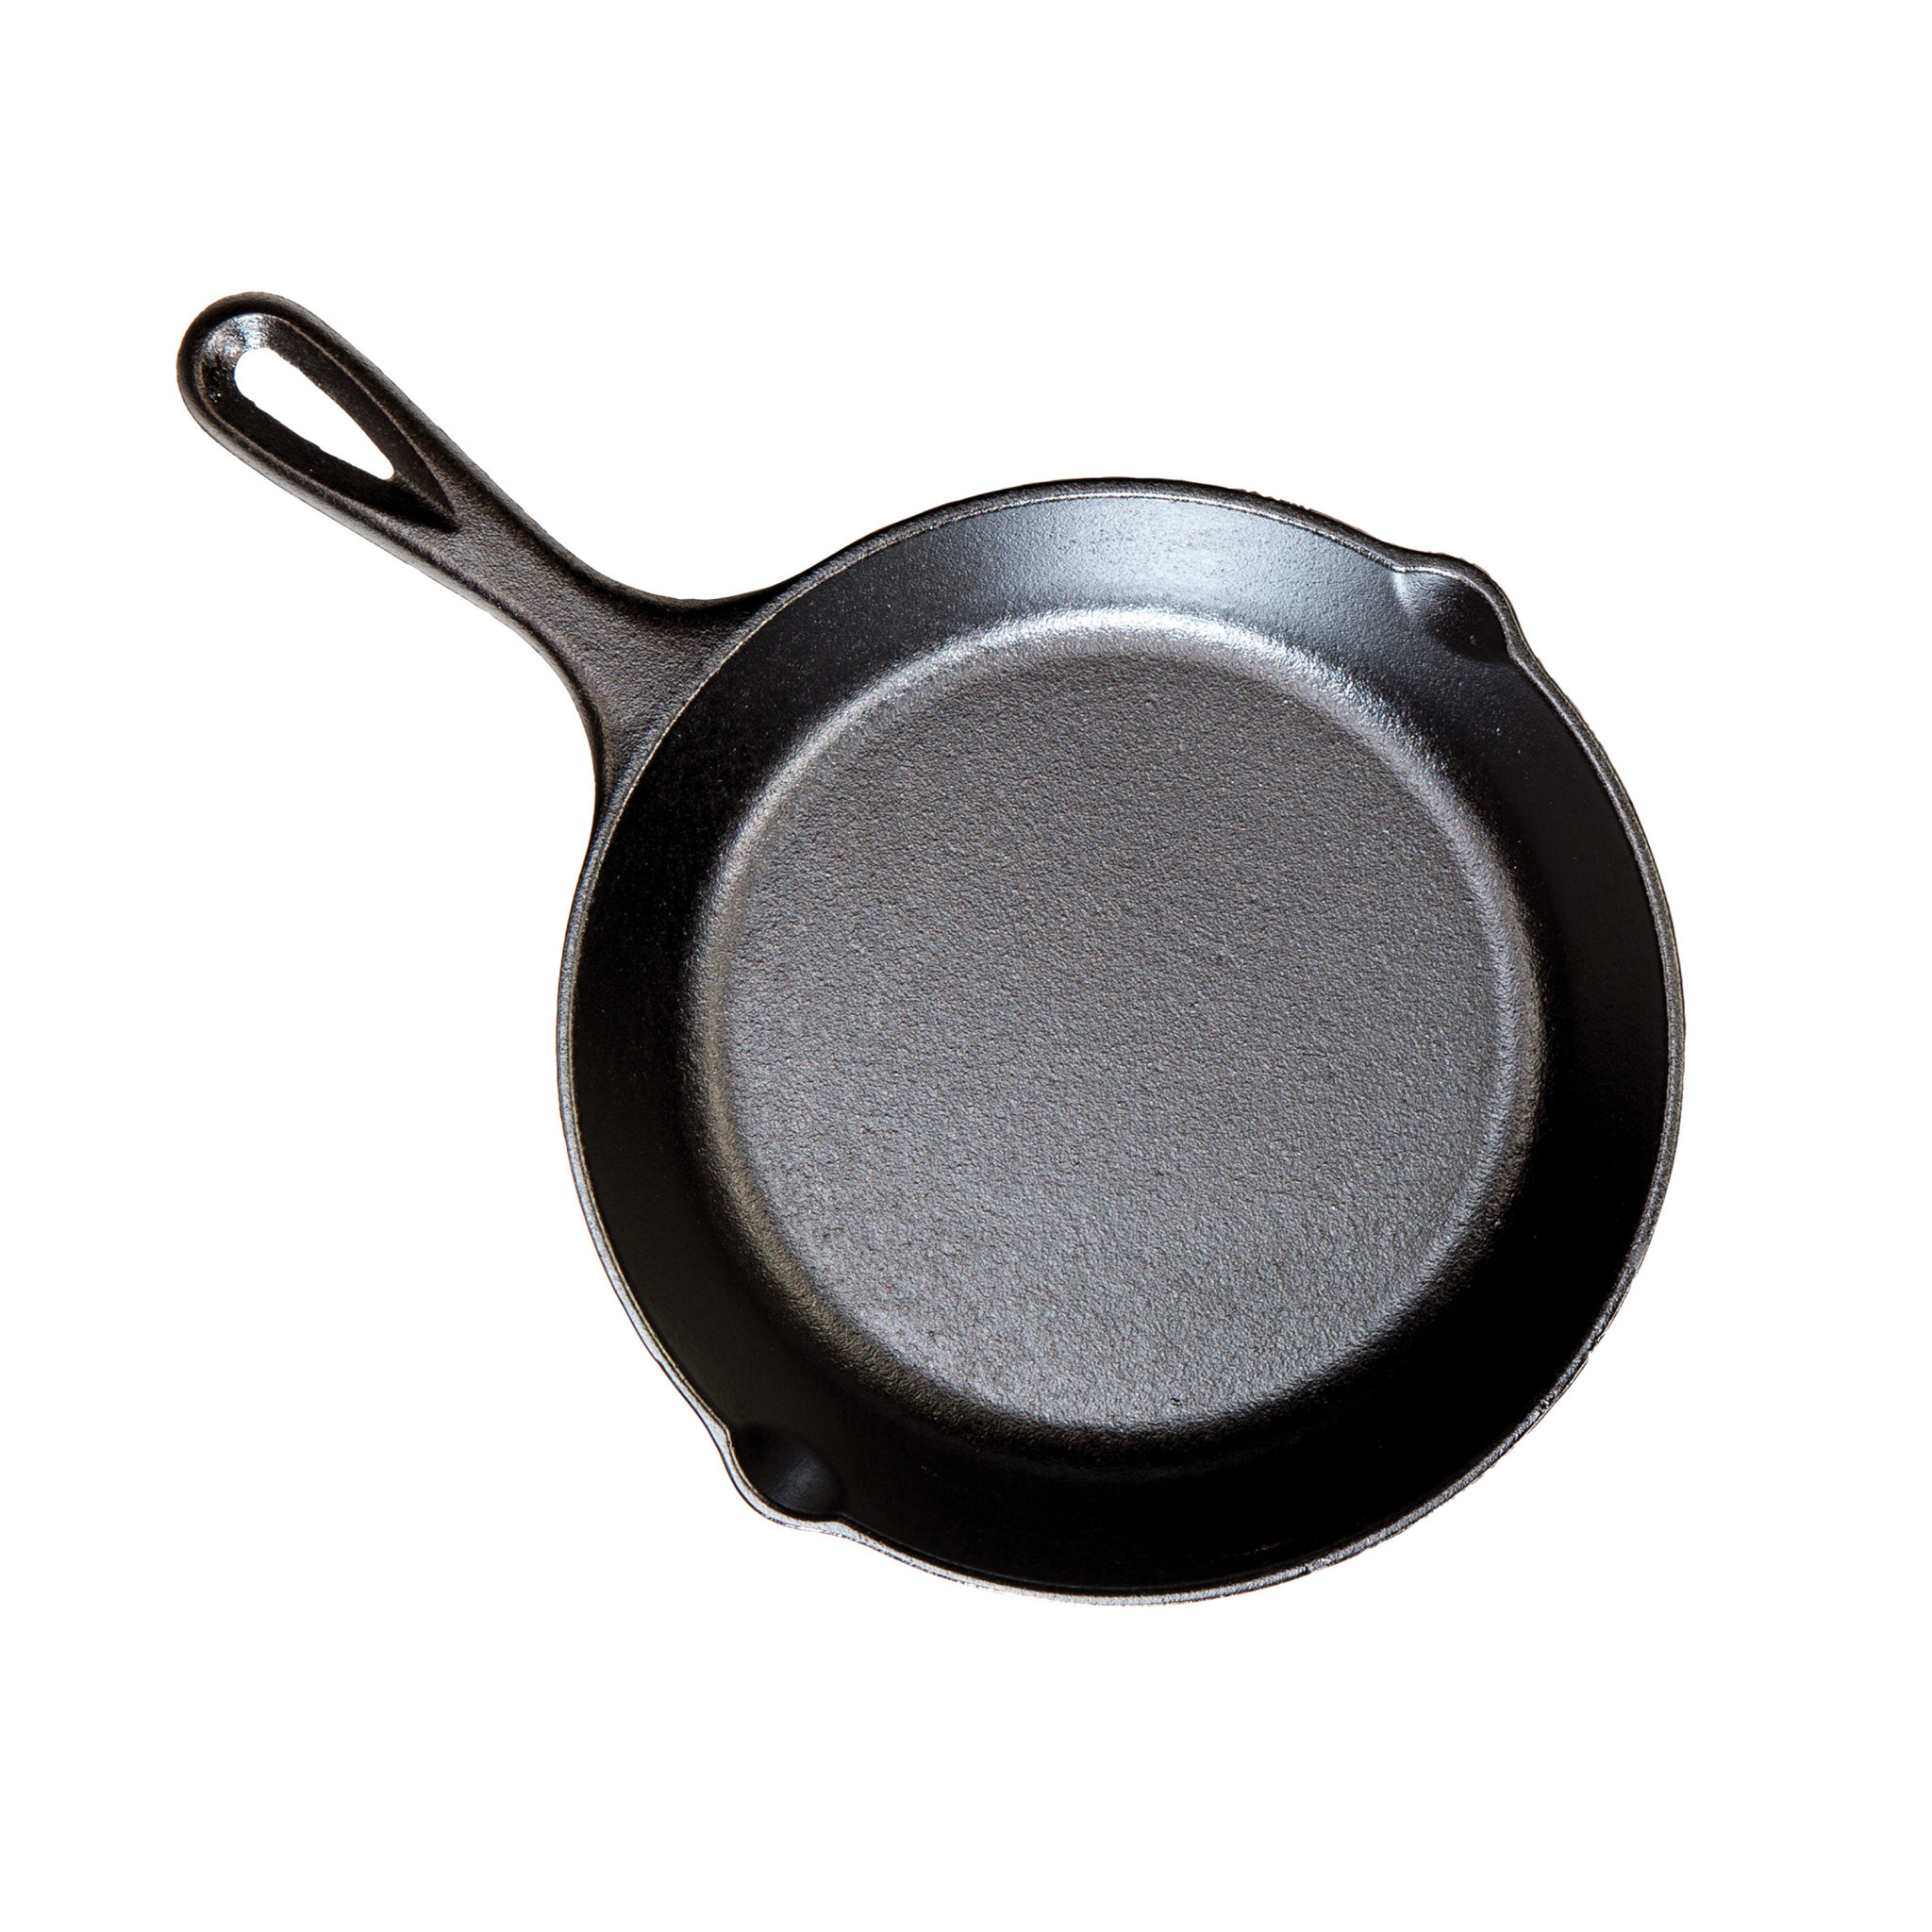 Lodge Chef Cast Iron Material 8 Inches Chef Style Skillet - 8 Skillet for  sale online